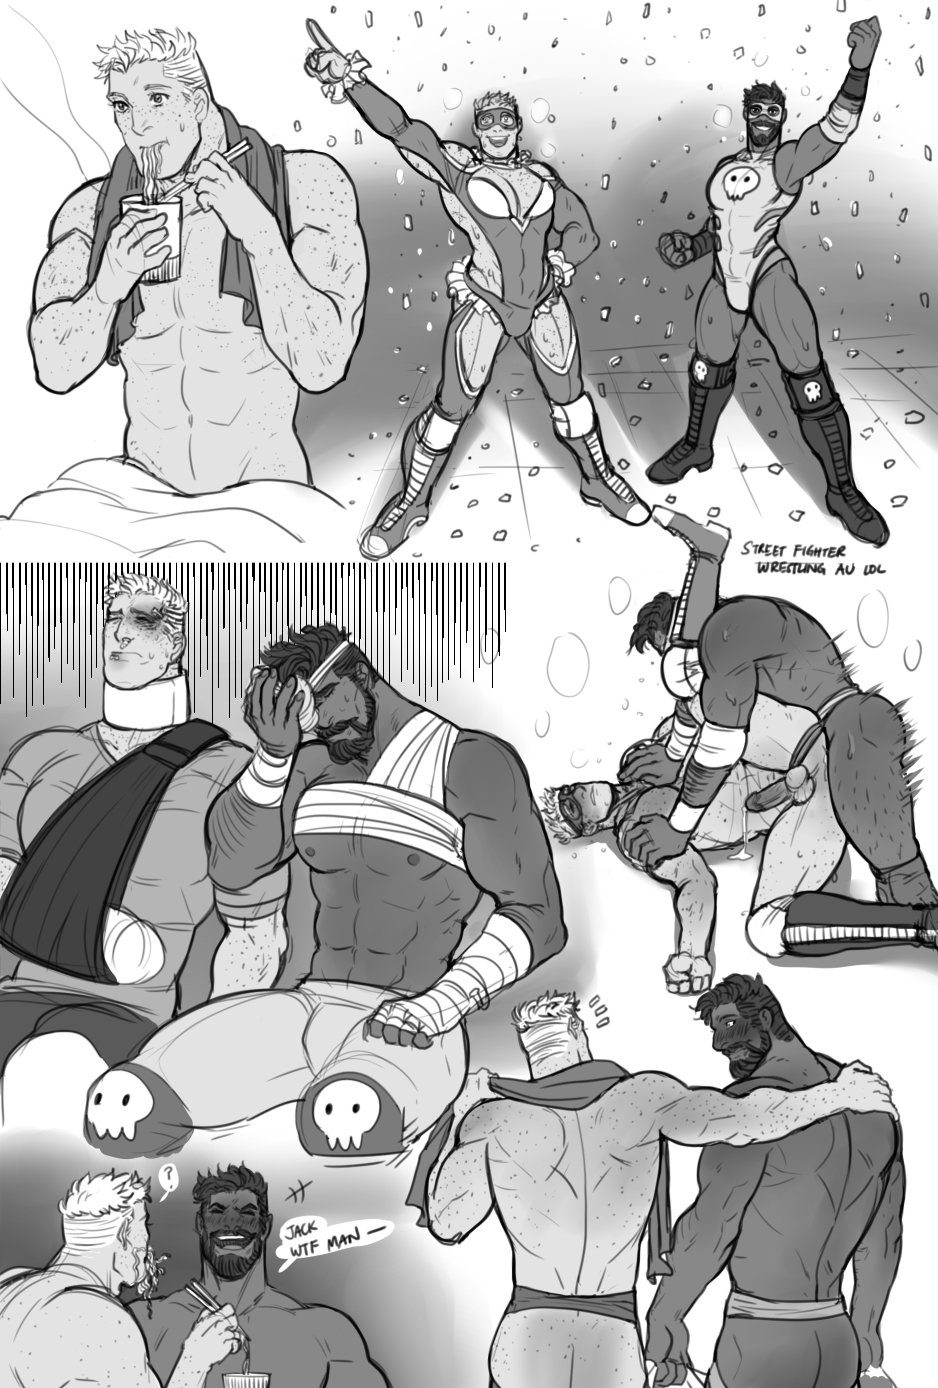 [hinokit] Overwatch Patreon NSFW Compilation - Page 37